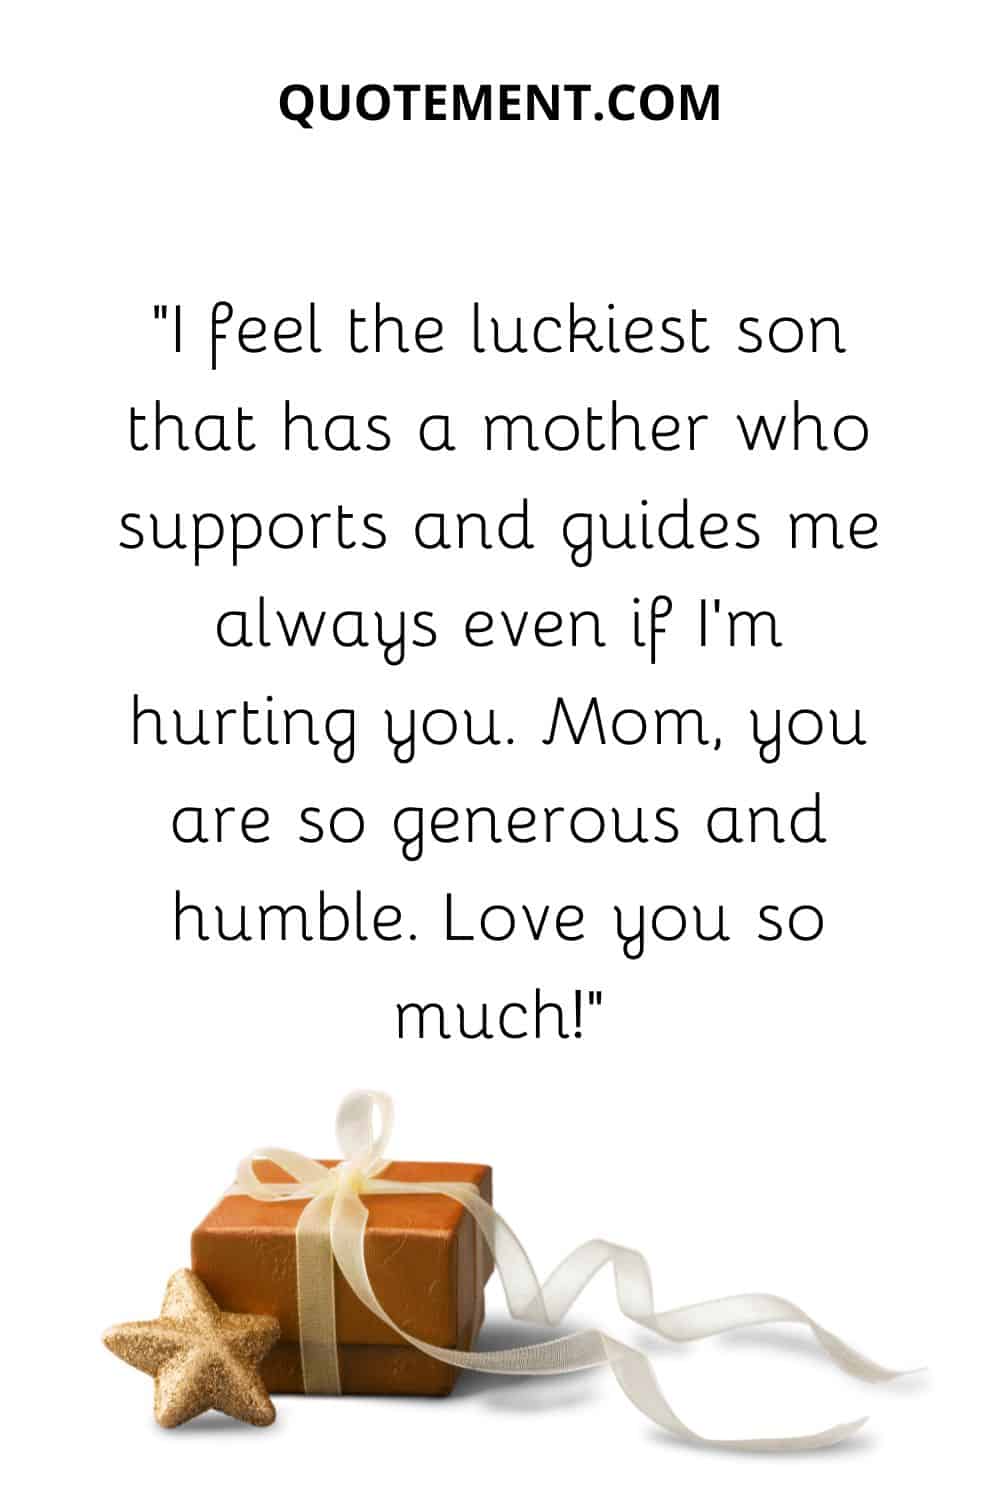 I feel the luckiest son that has a mother who supports and guides me always even if I’m hurting you